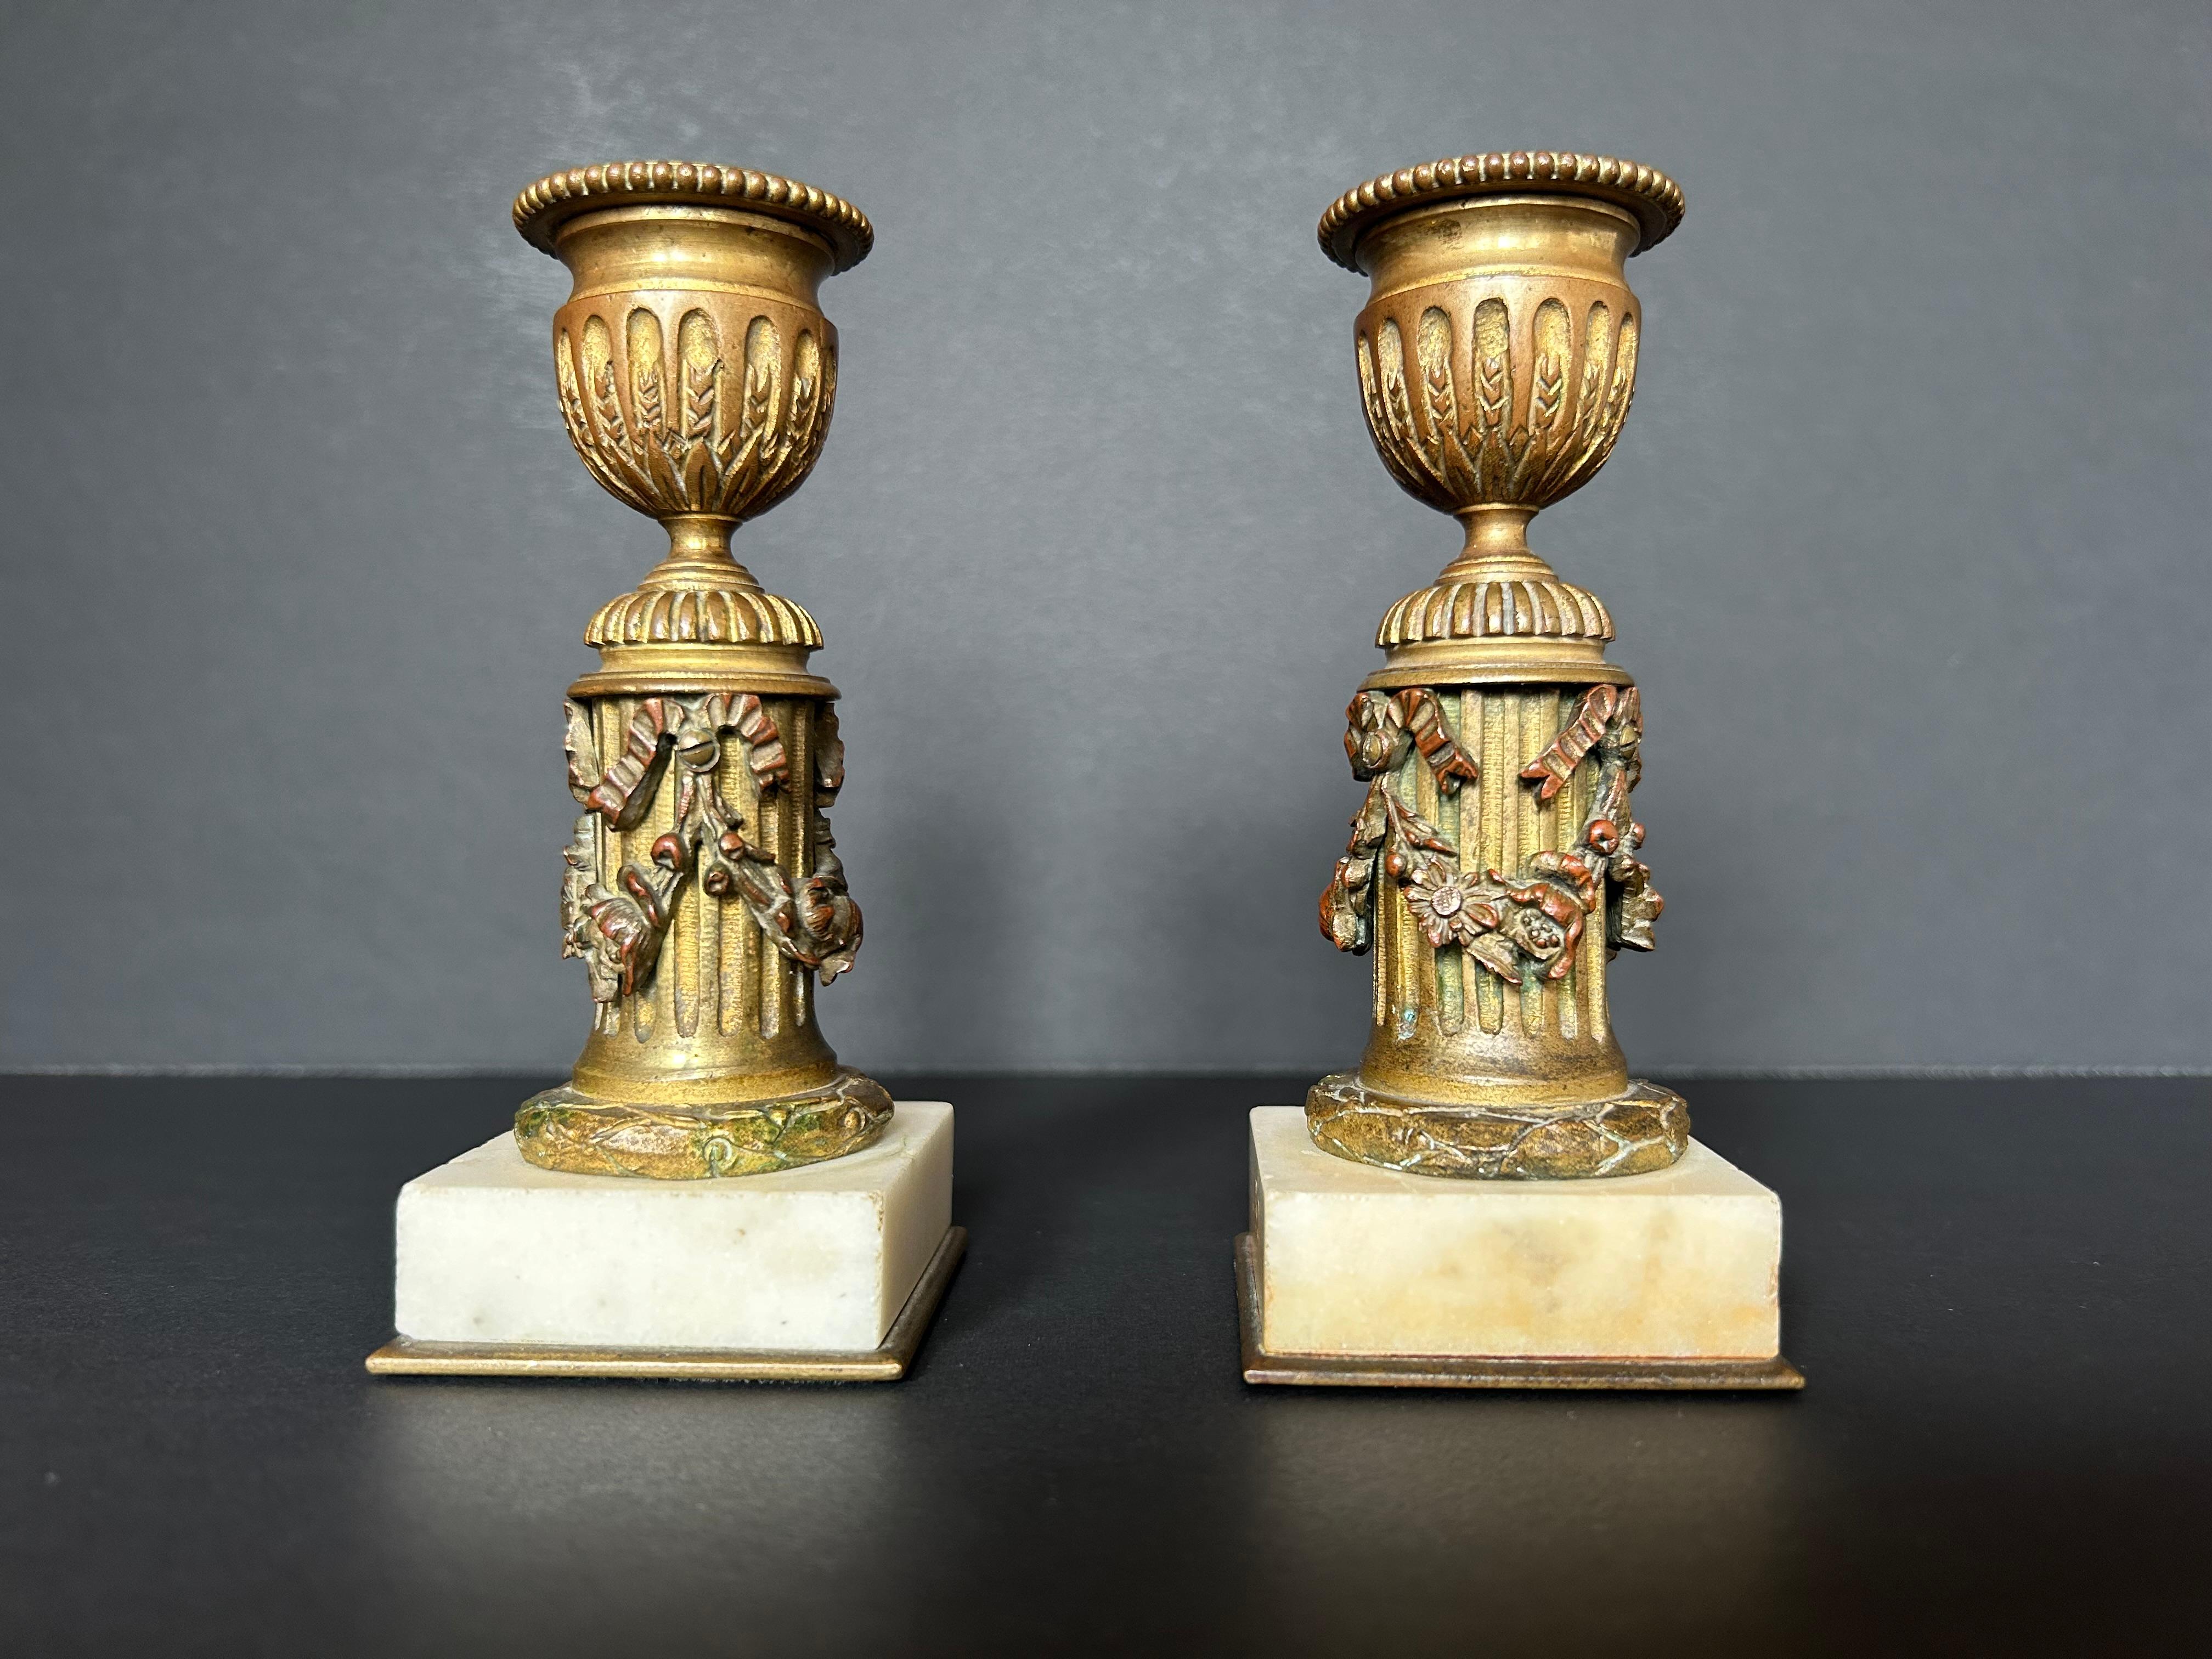 An exquisite pair of early nineteenth century small candlesticks from France, made of gilt bronze on small, square alabaster bases. These candlesticks feature neoclassical columns swagged in flower garlands and ribbons, surmounted by two intricately